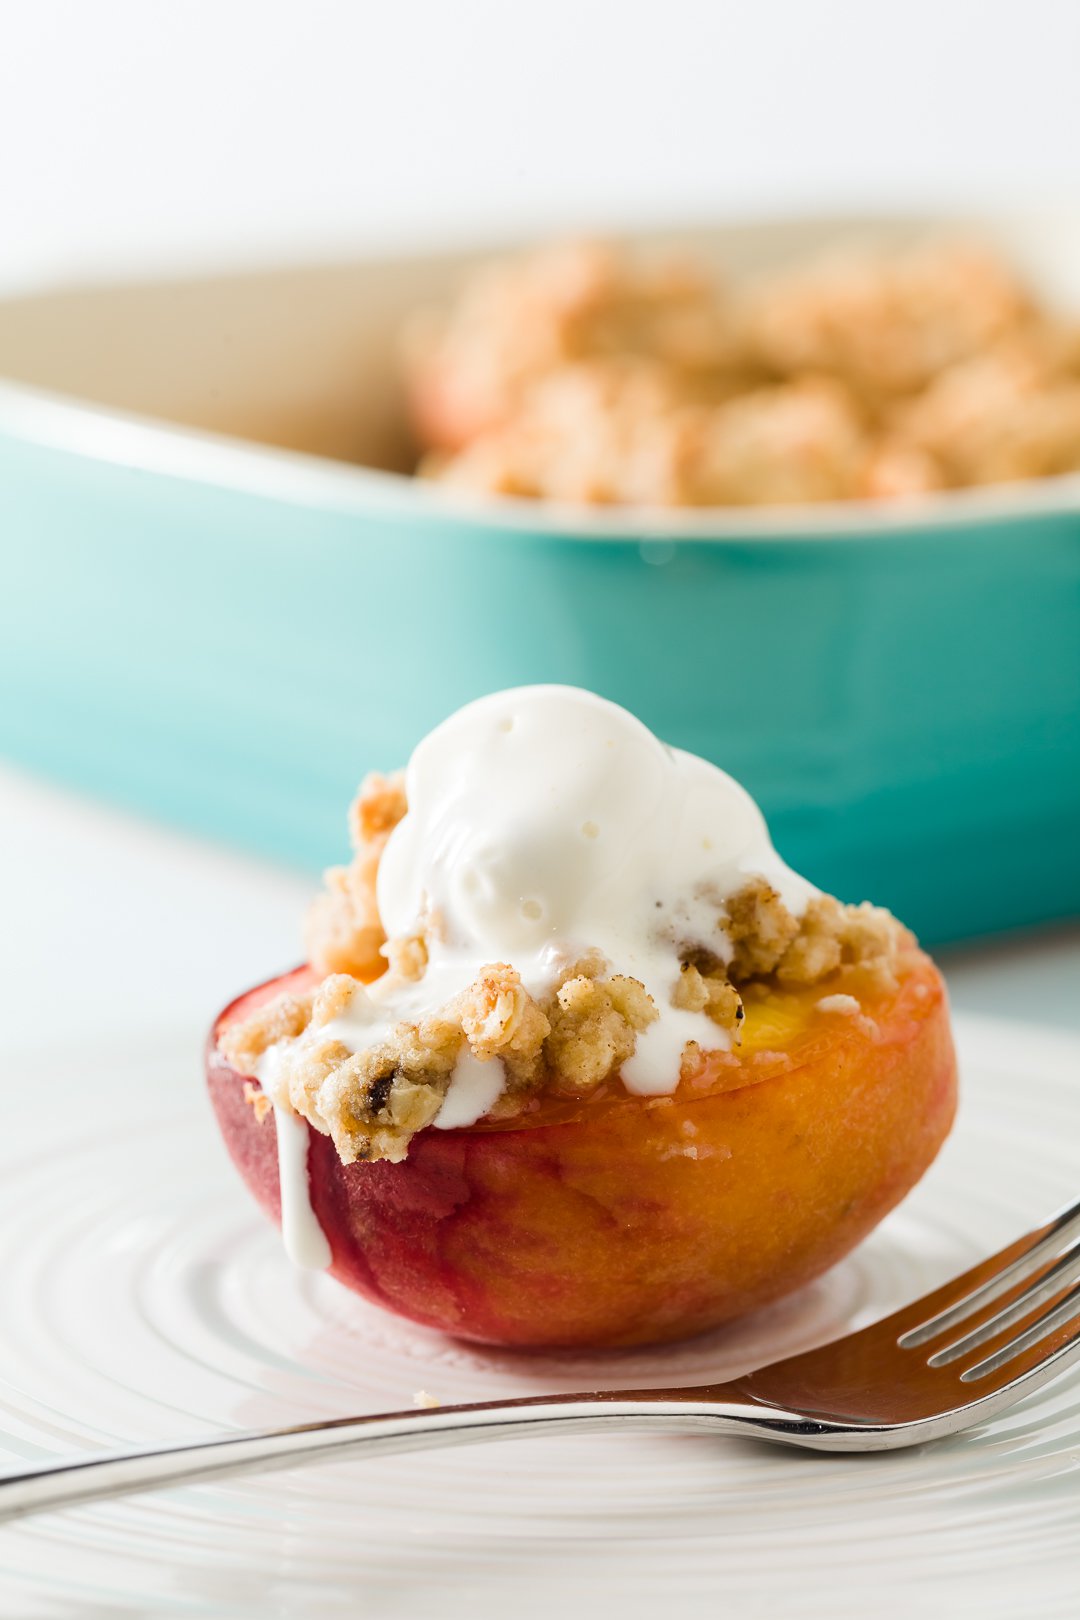 Baked peaches with dripping whipped cream